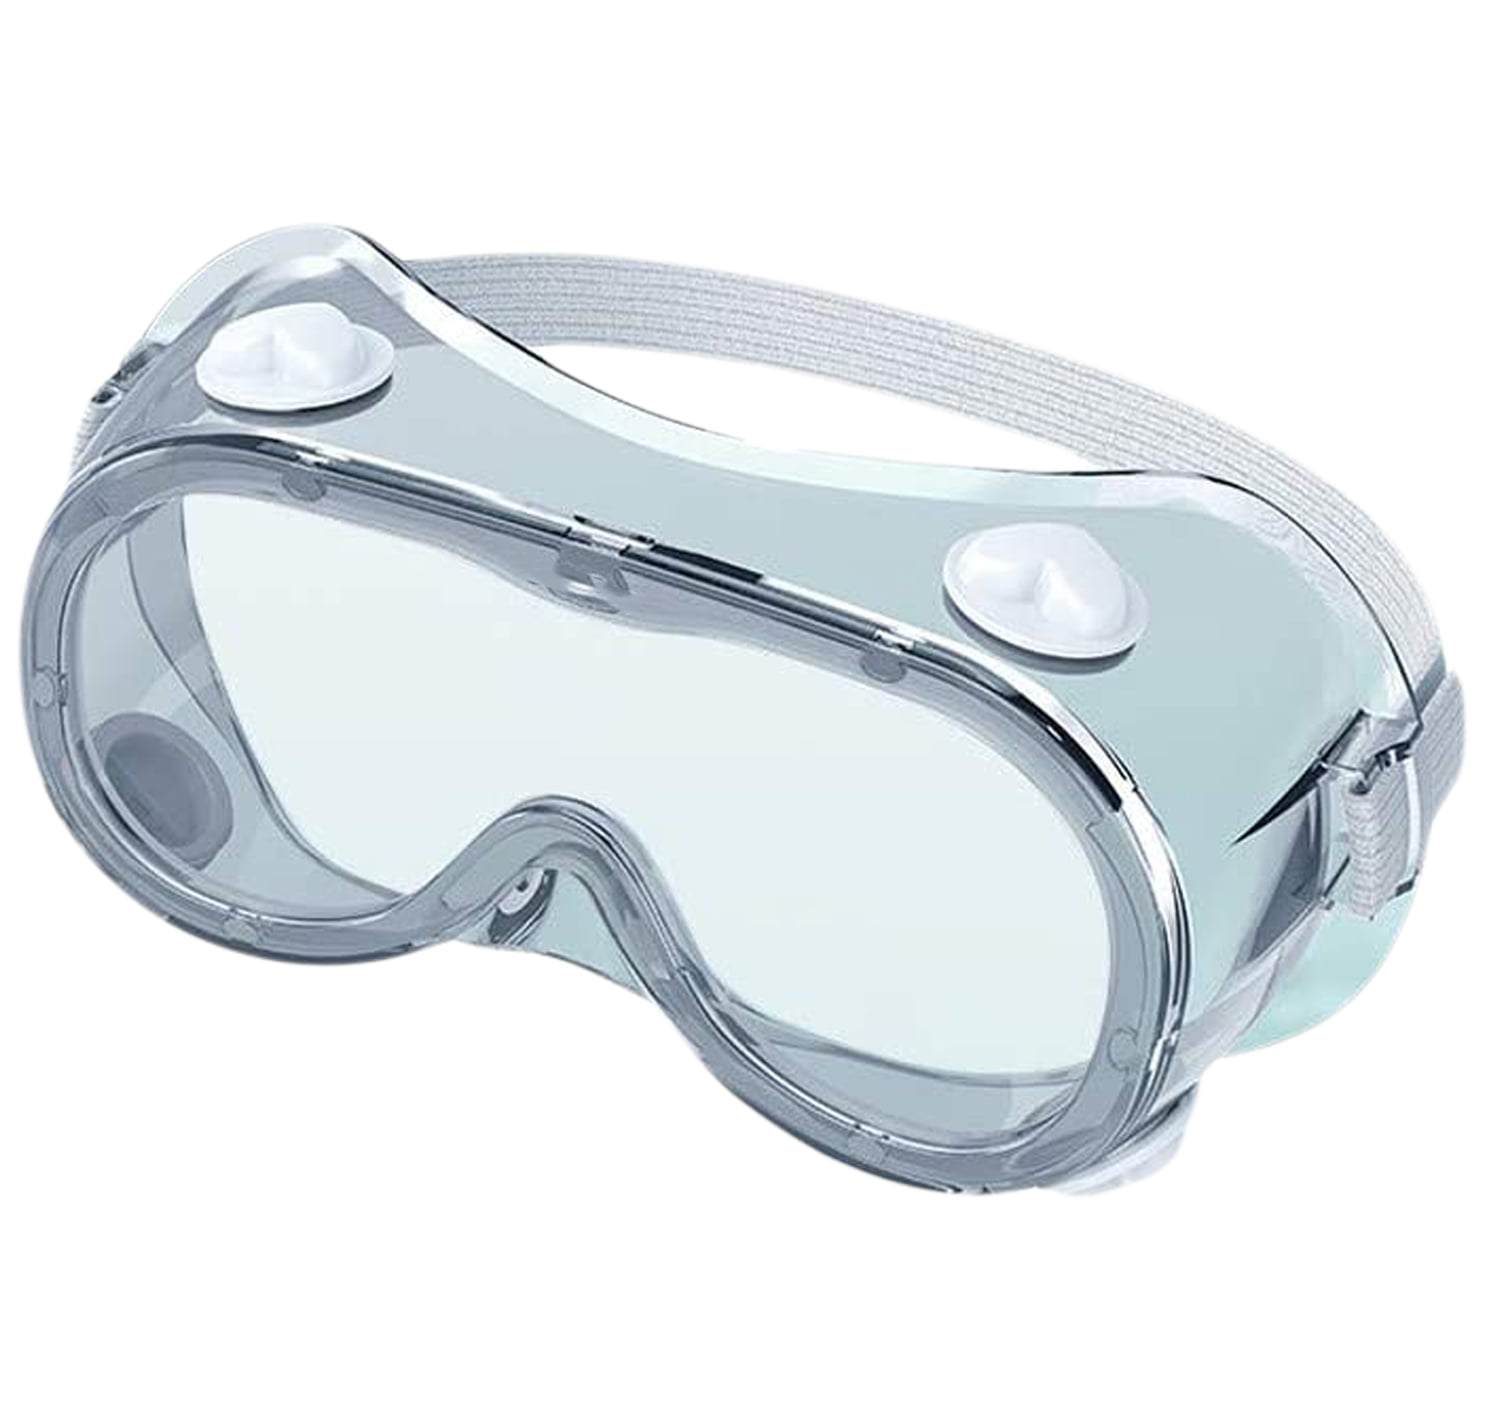 Fog Welding Safety Goggles Protective Glasses Eye Protection PPE Anti Scratch 